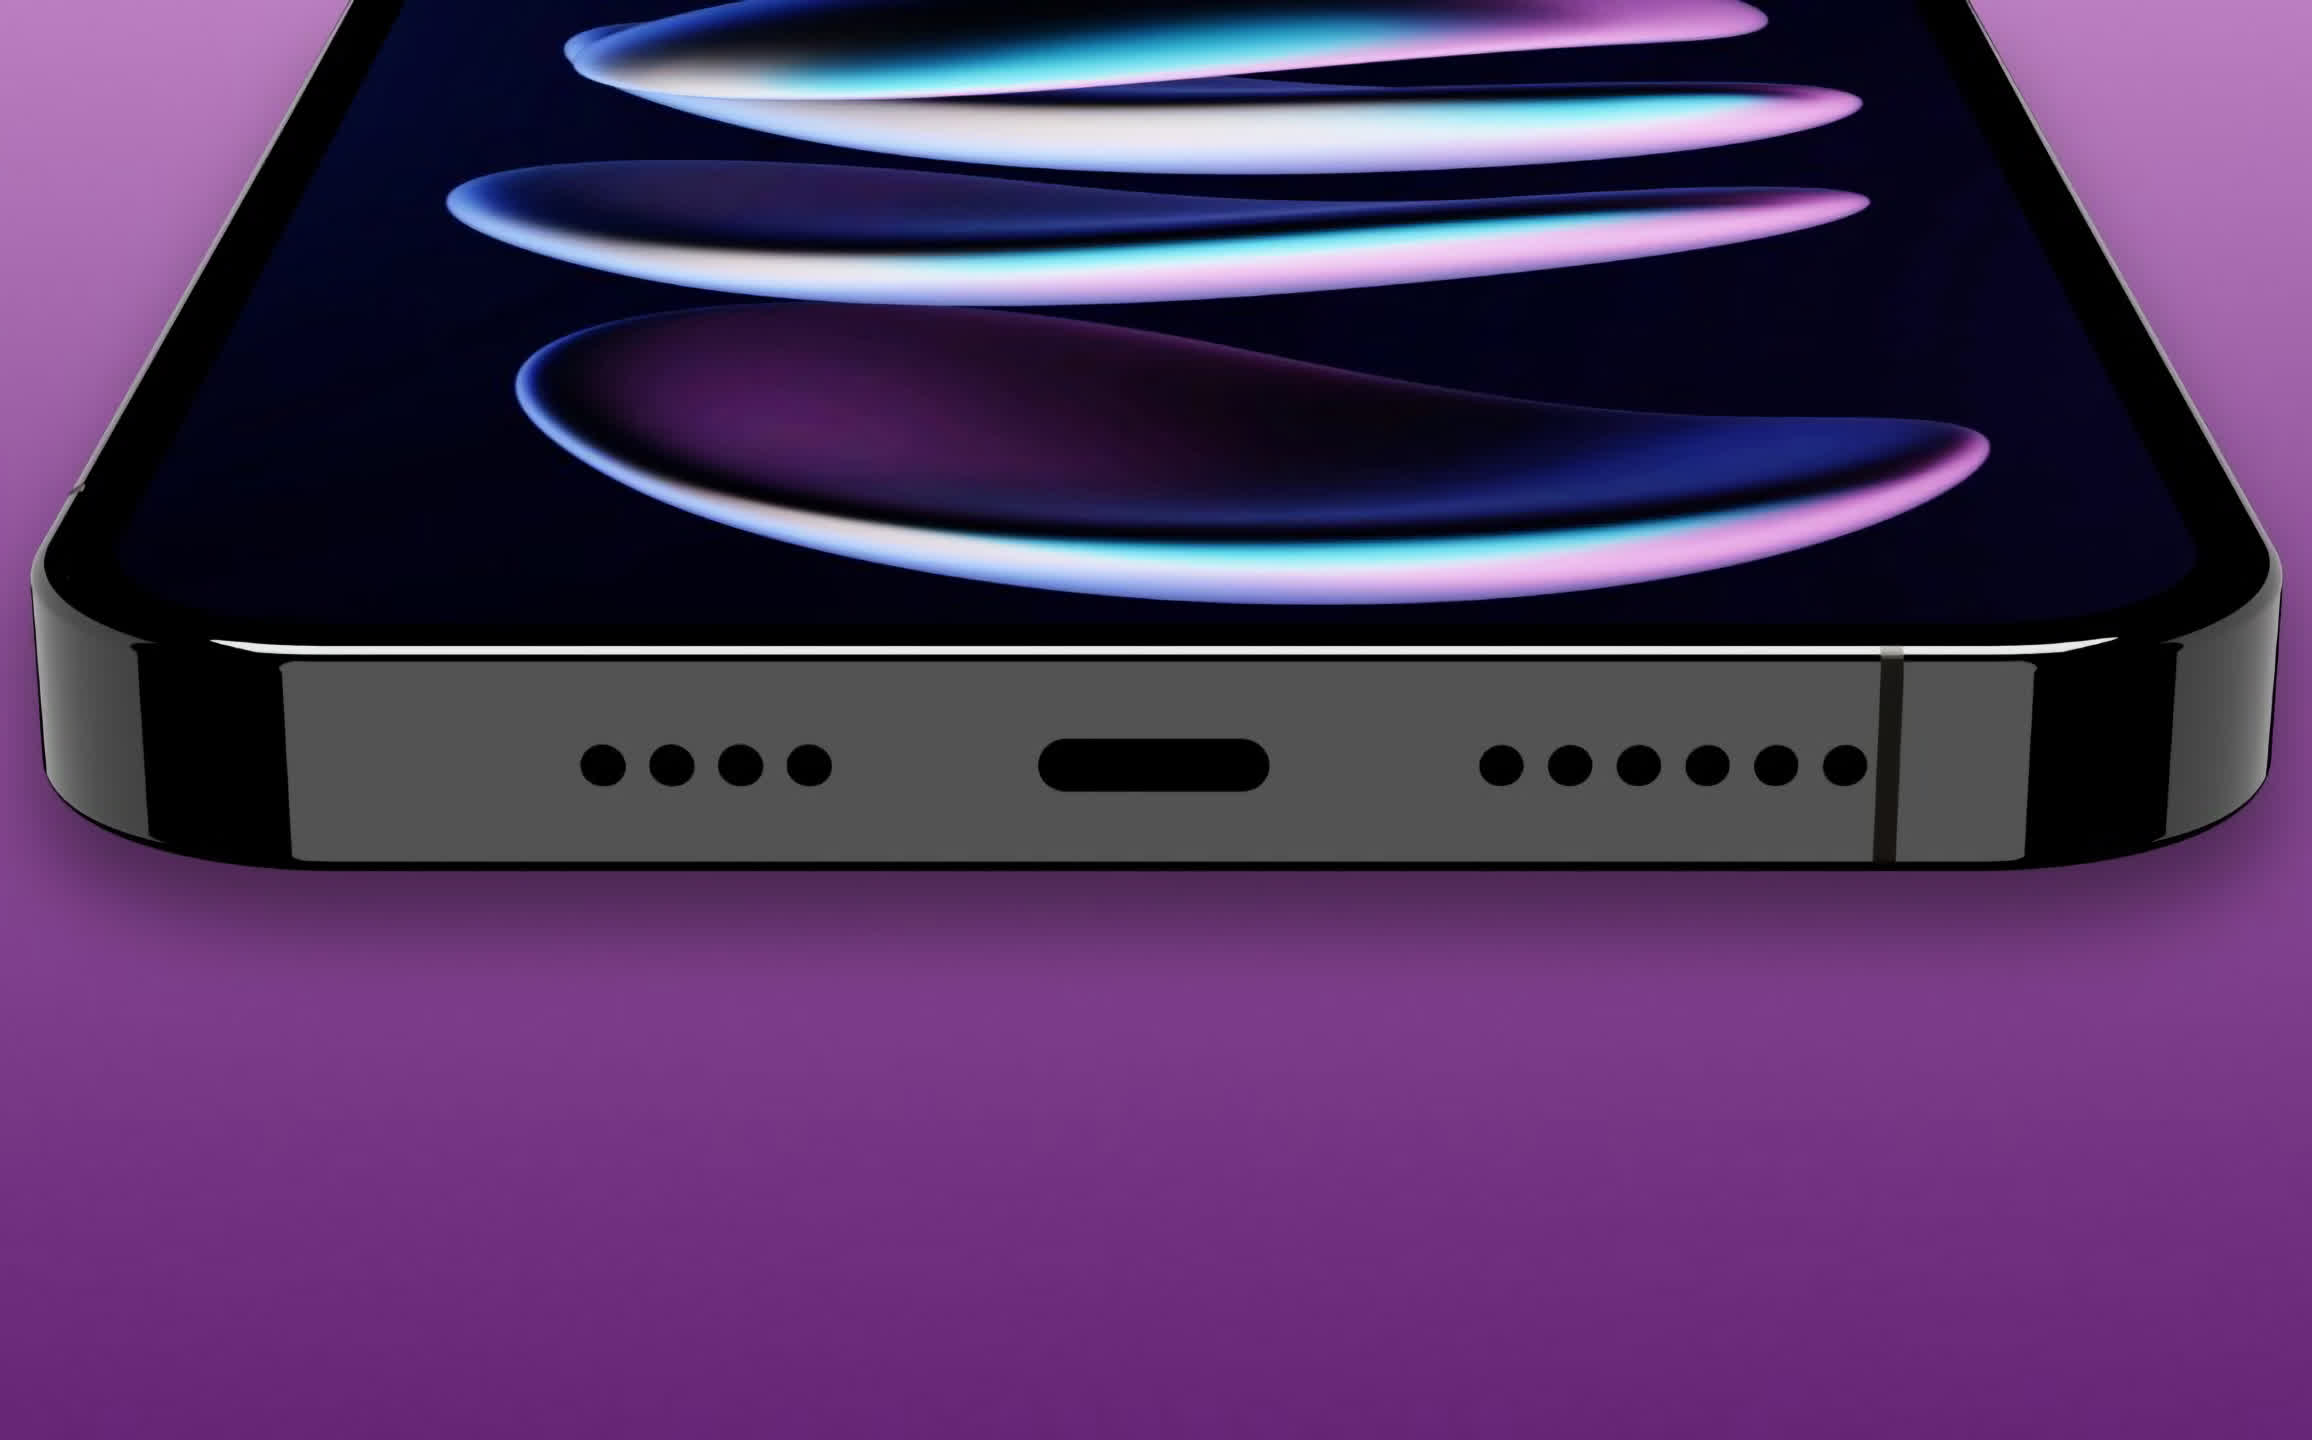 Apple's iPhone 15 Pro may get faster USB-C ports than mainstream models